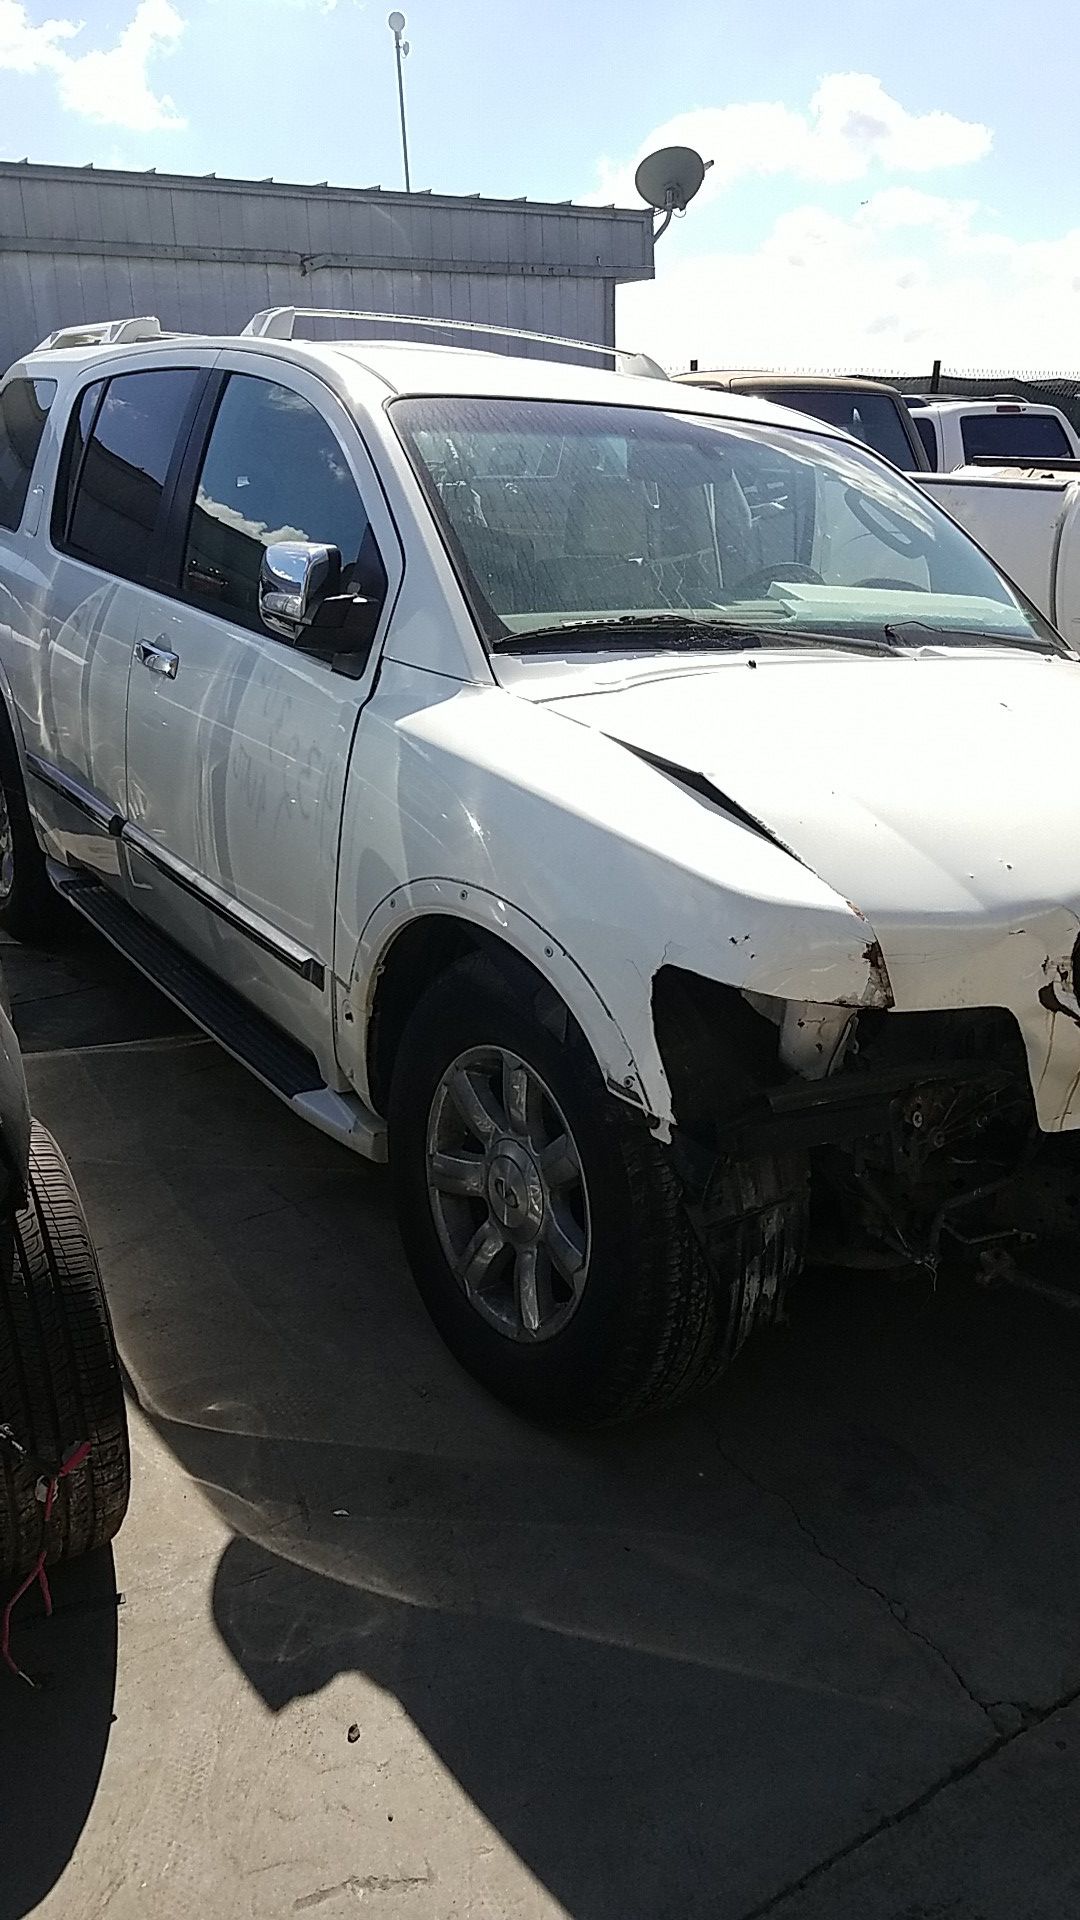 2004 Infiniti qx56 (parts only)